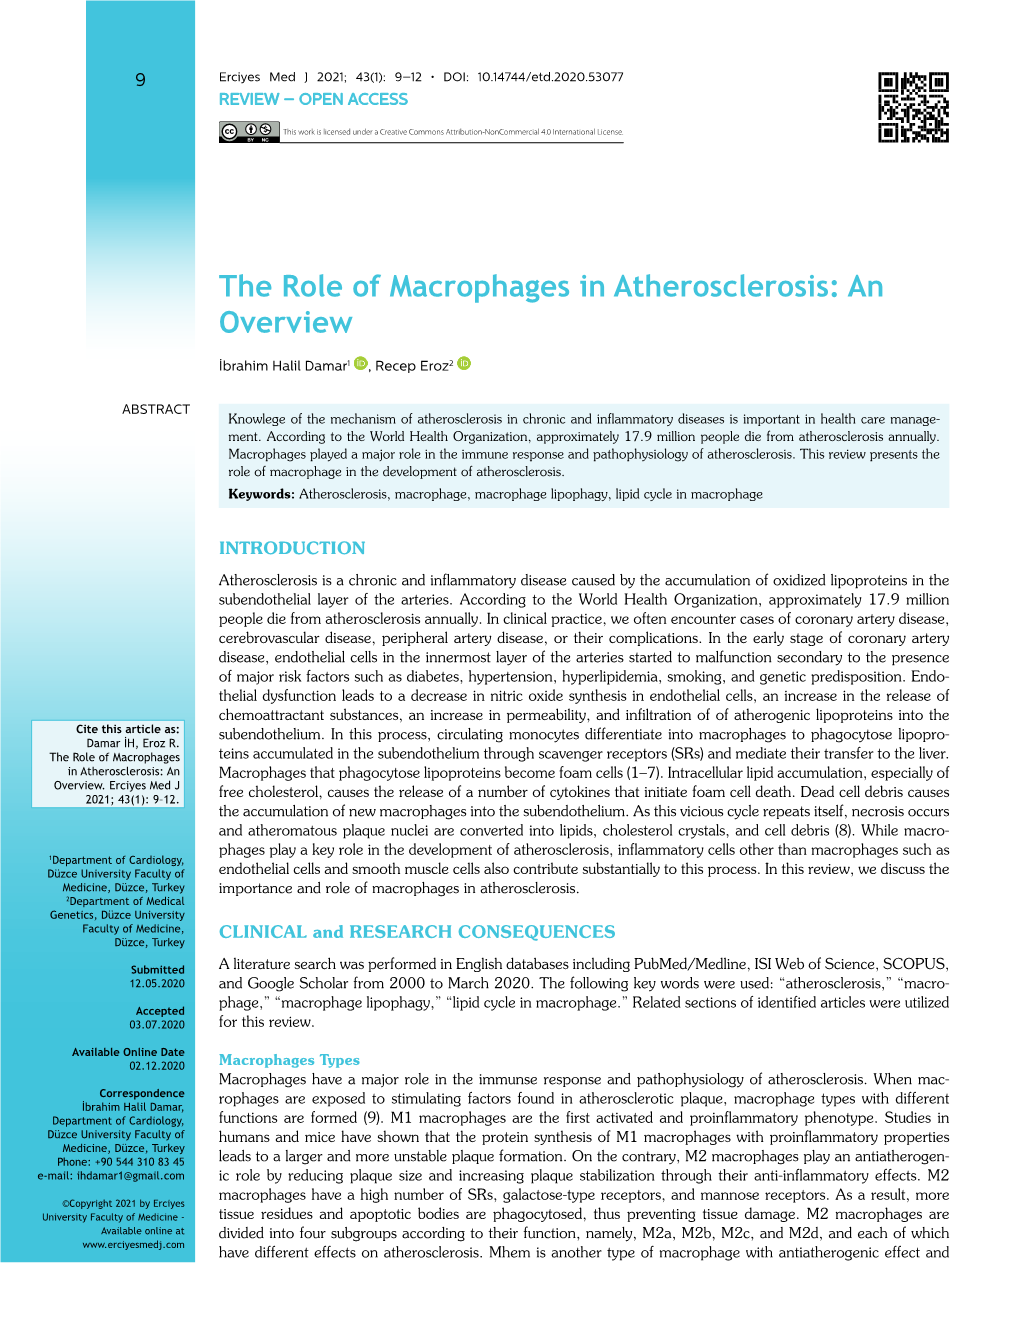 The Role of Macrophages in Atherosclerosis: an Overview